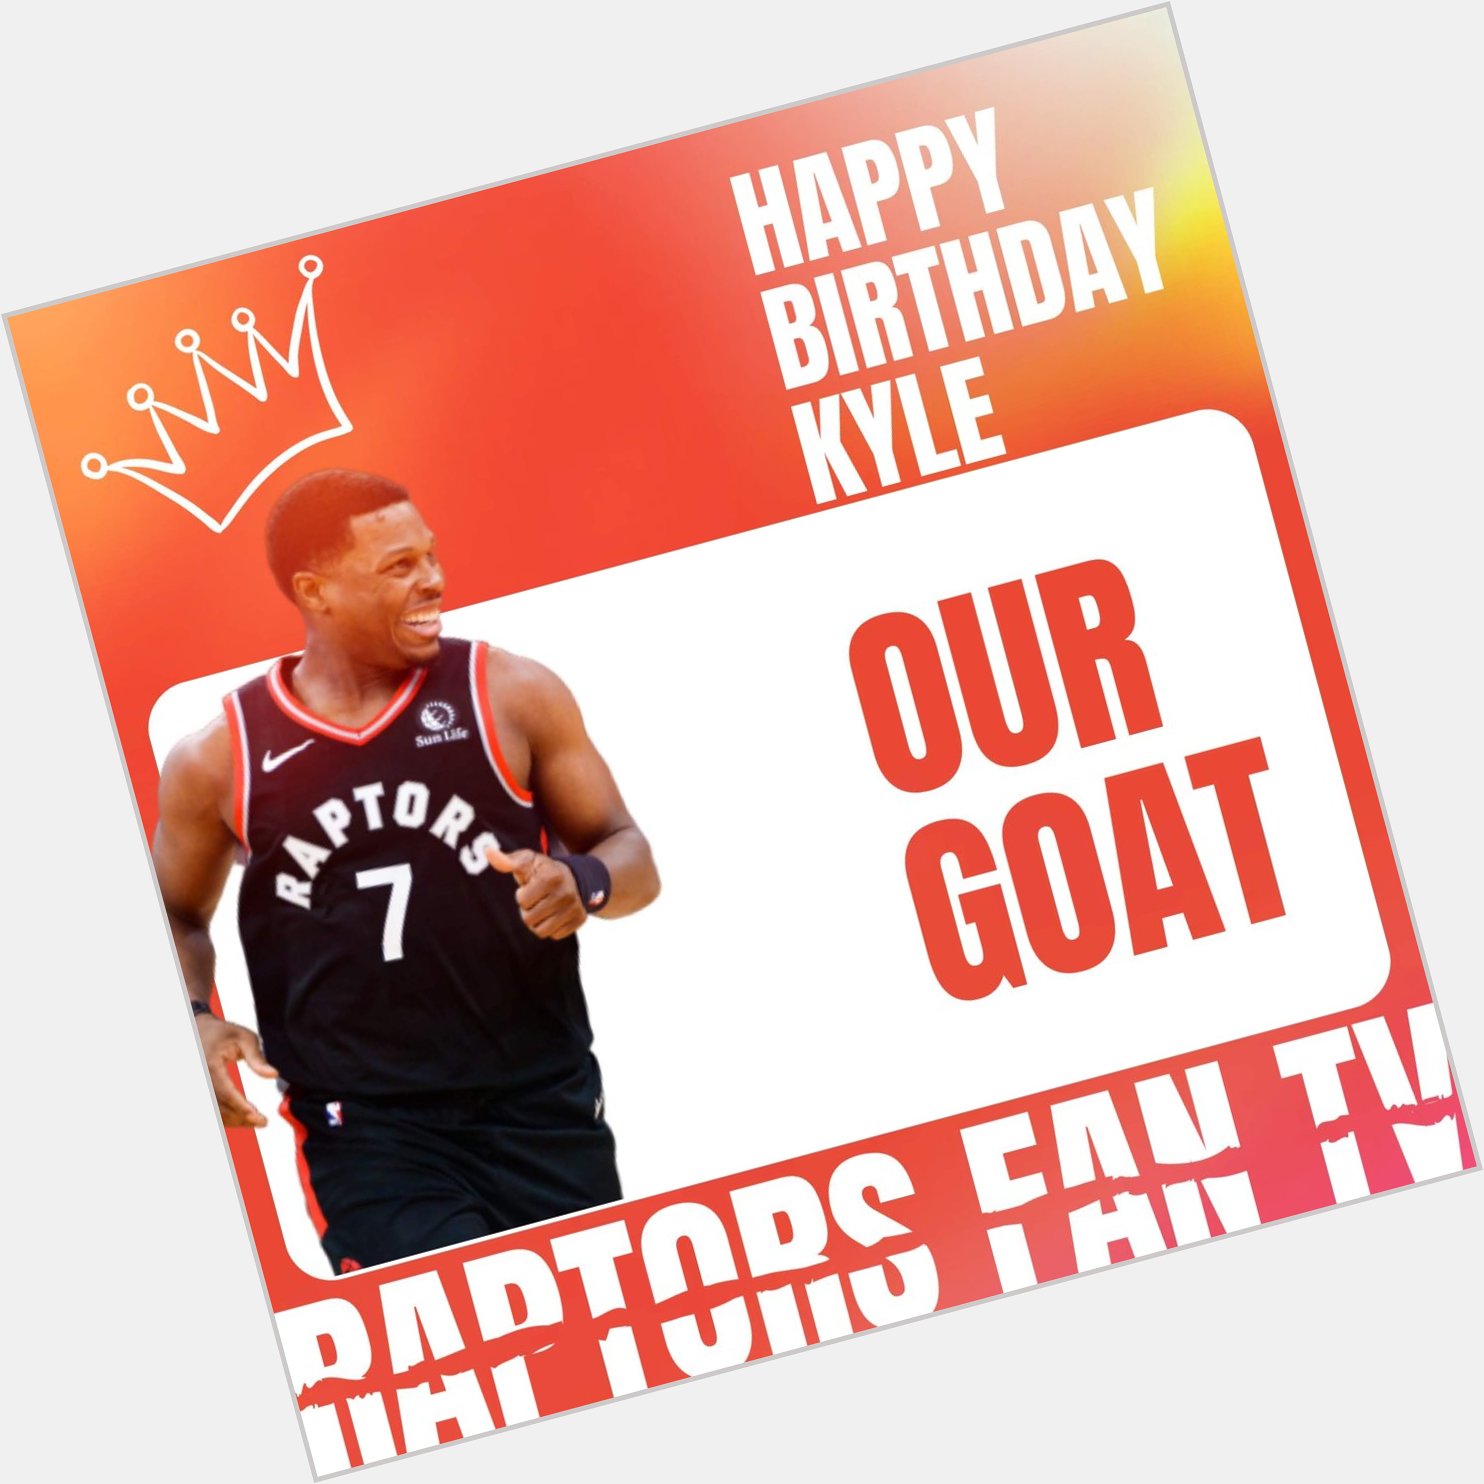 Happy Birthday to our GOAT Kyle Lowry 